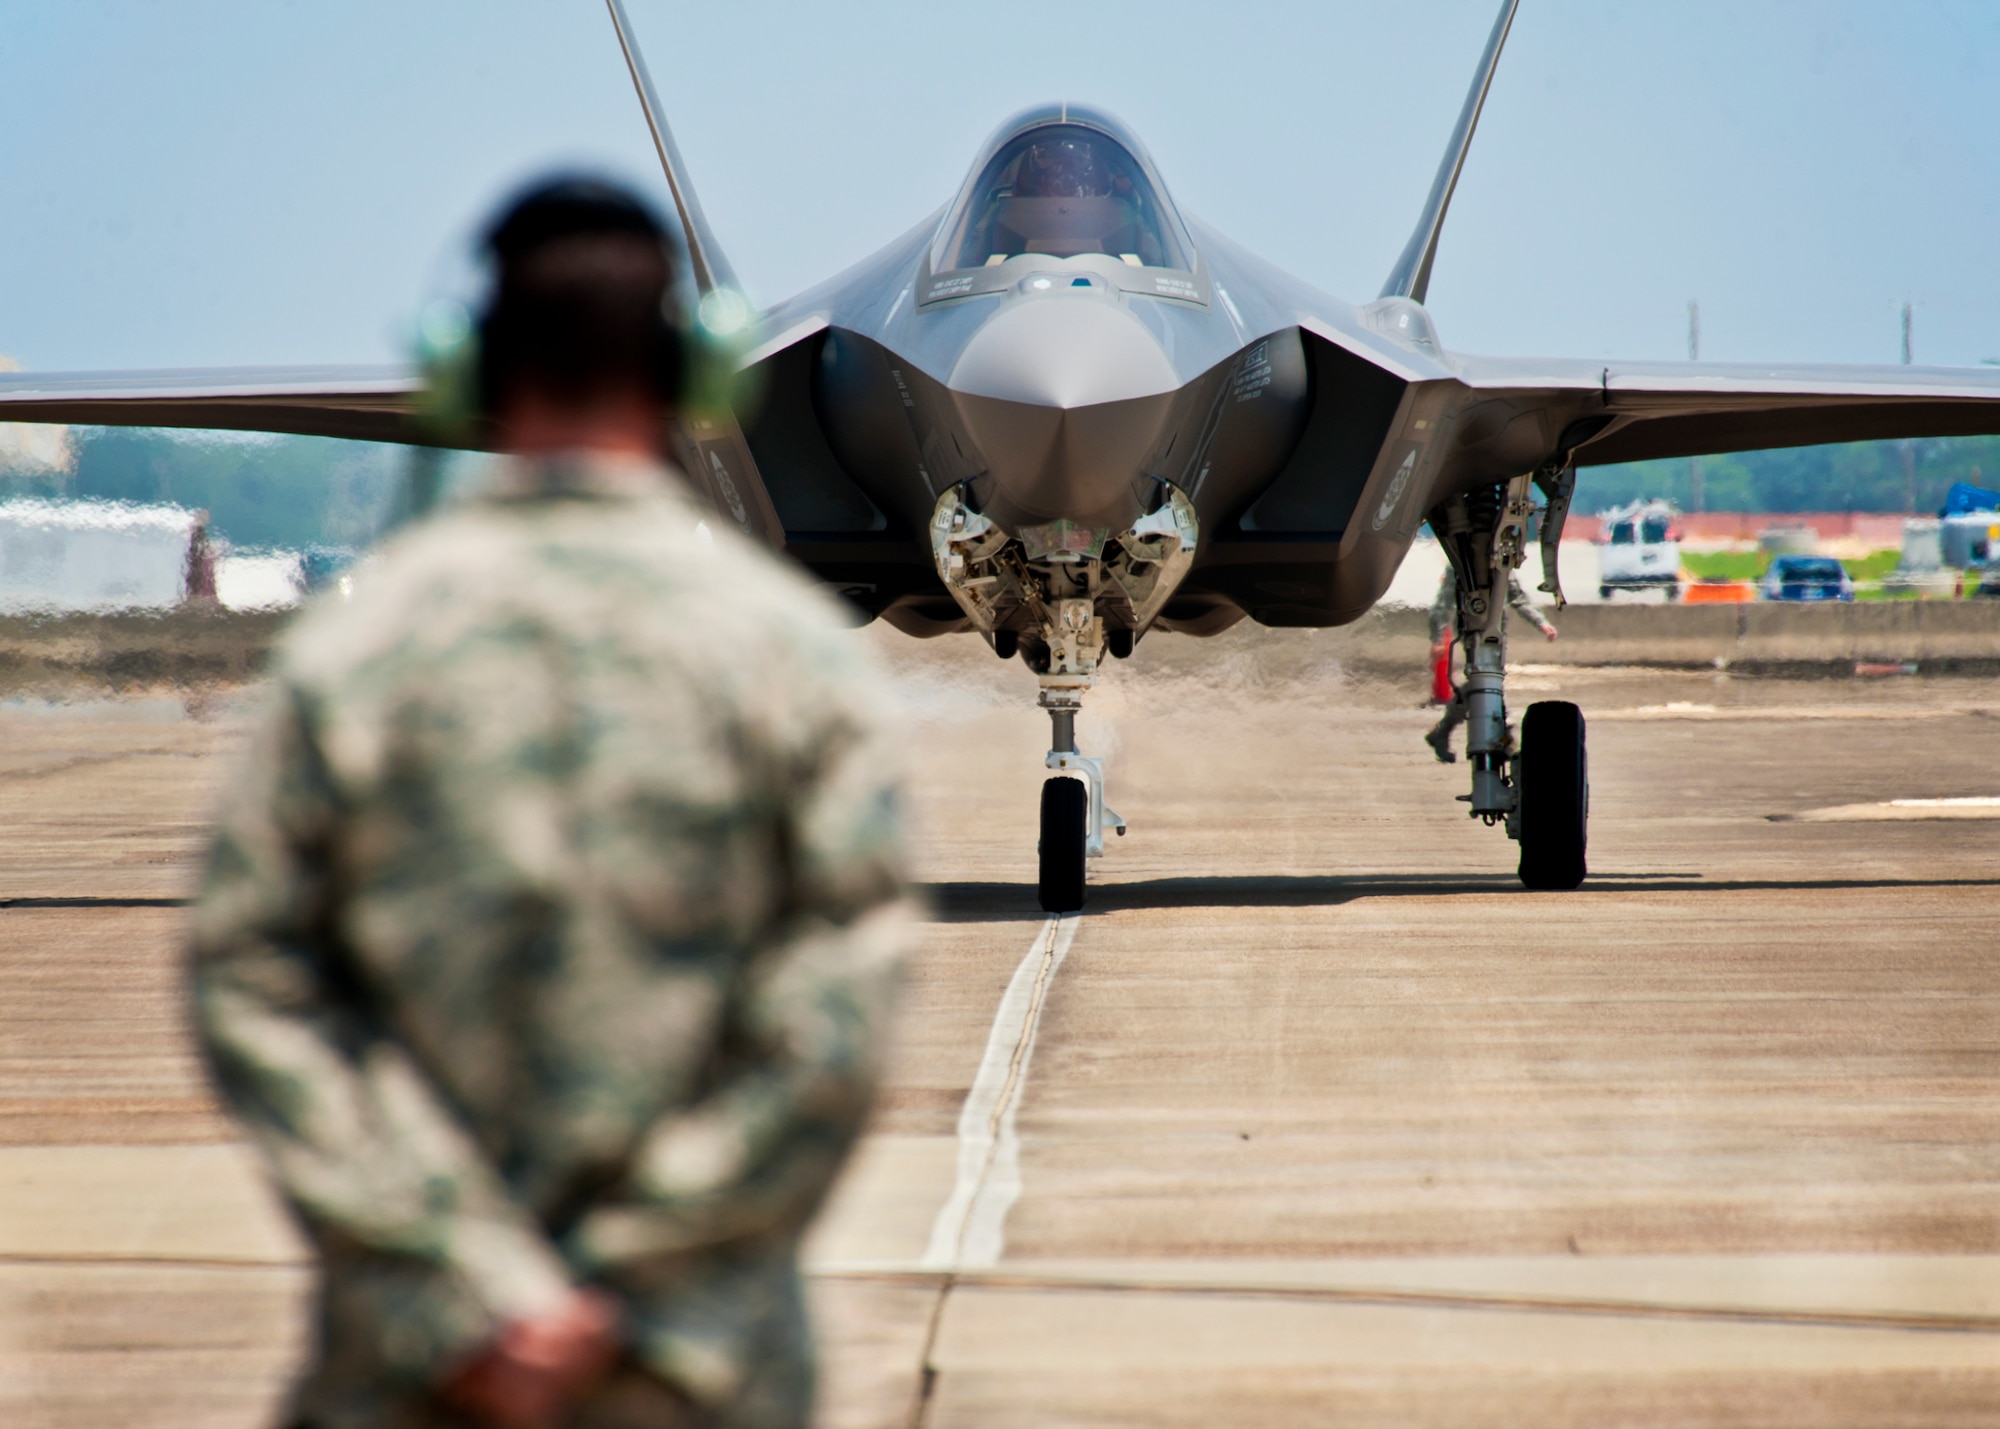 F-35 Lightning II joint strike fighter crew chief, Tech. Sgt. Brian West, watches his aircraft approach for the first time at Eglin Air Force Base, Fla., July 14.  Aircraft 0747 is DoD’s newest aircraft.  (U.S. Air Force photo/Samuel King Jr.)